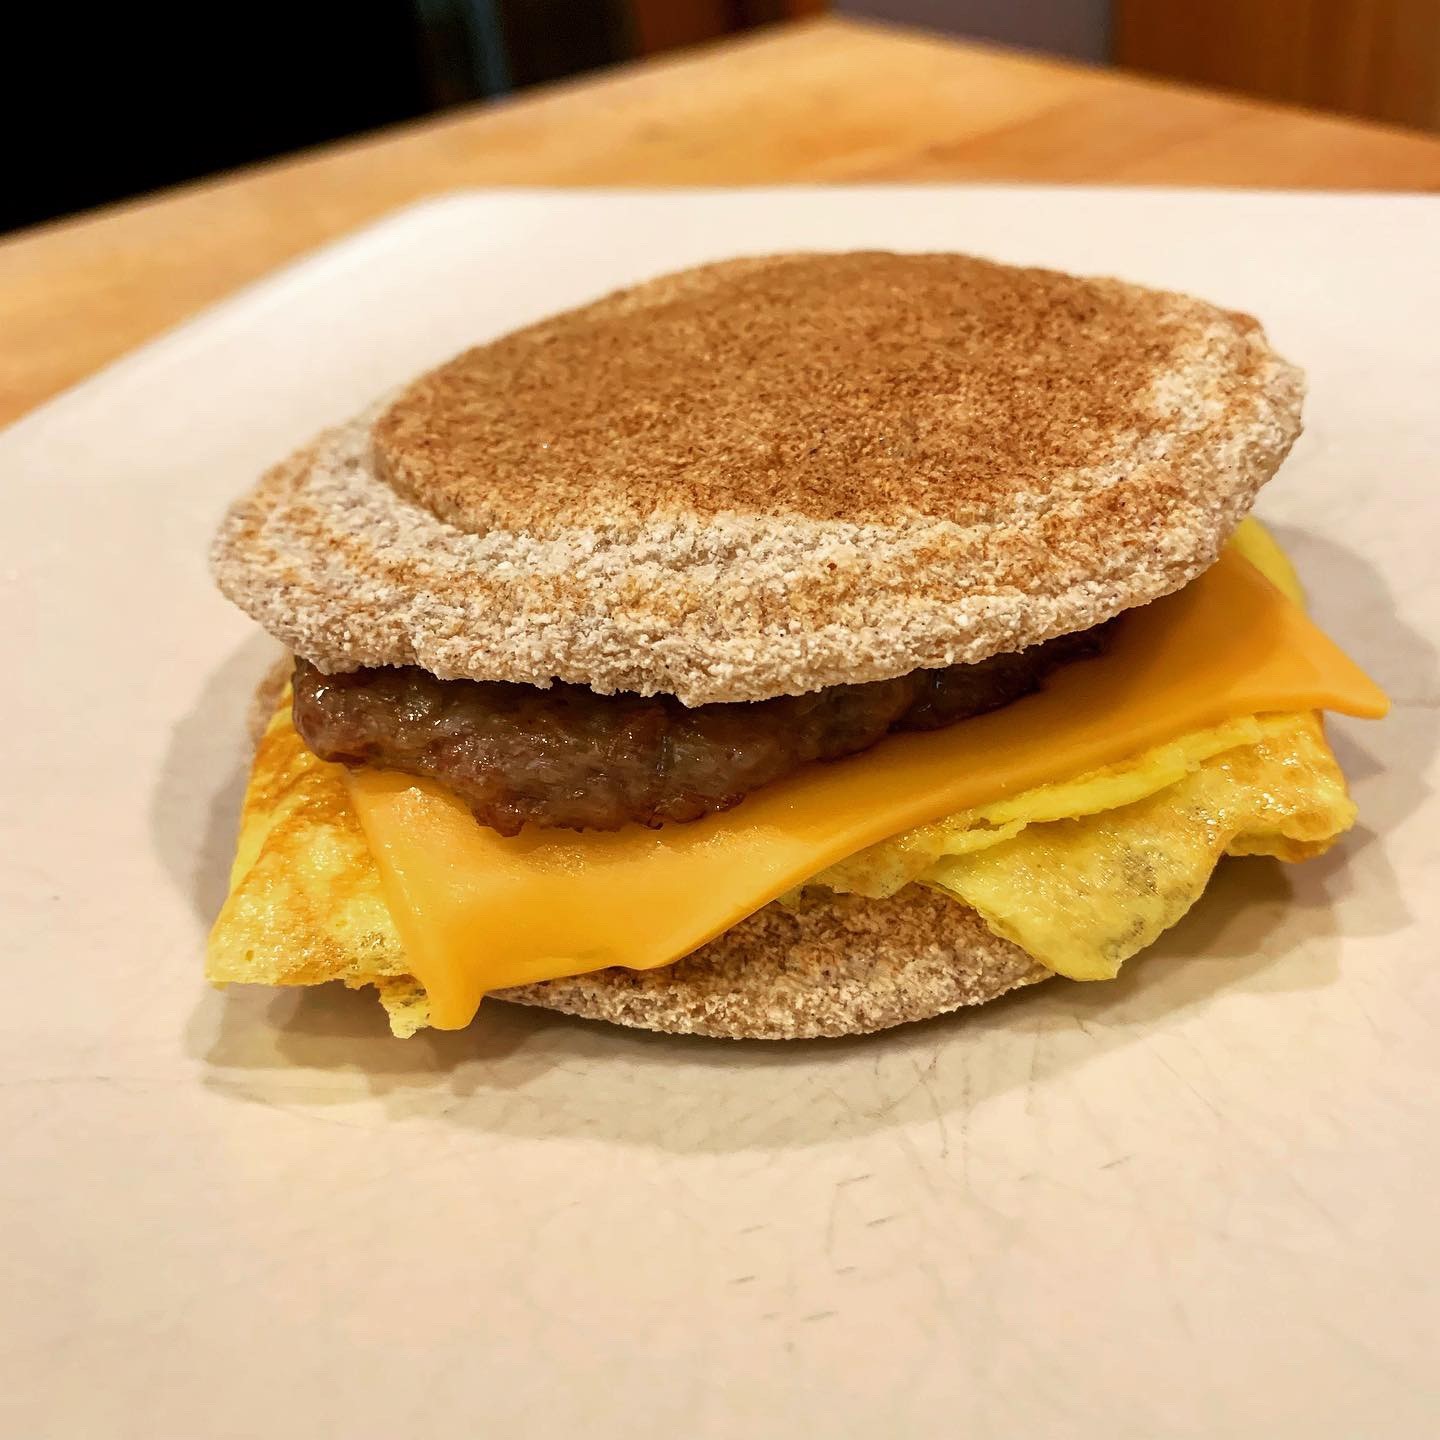 https://www.seriousketo.com/wp-content/uploads/2019/09/McGriddle-Closed.jpg